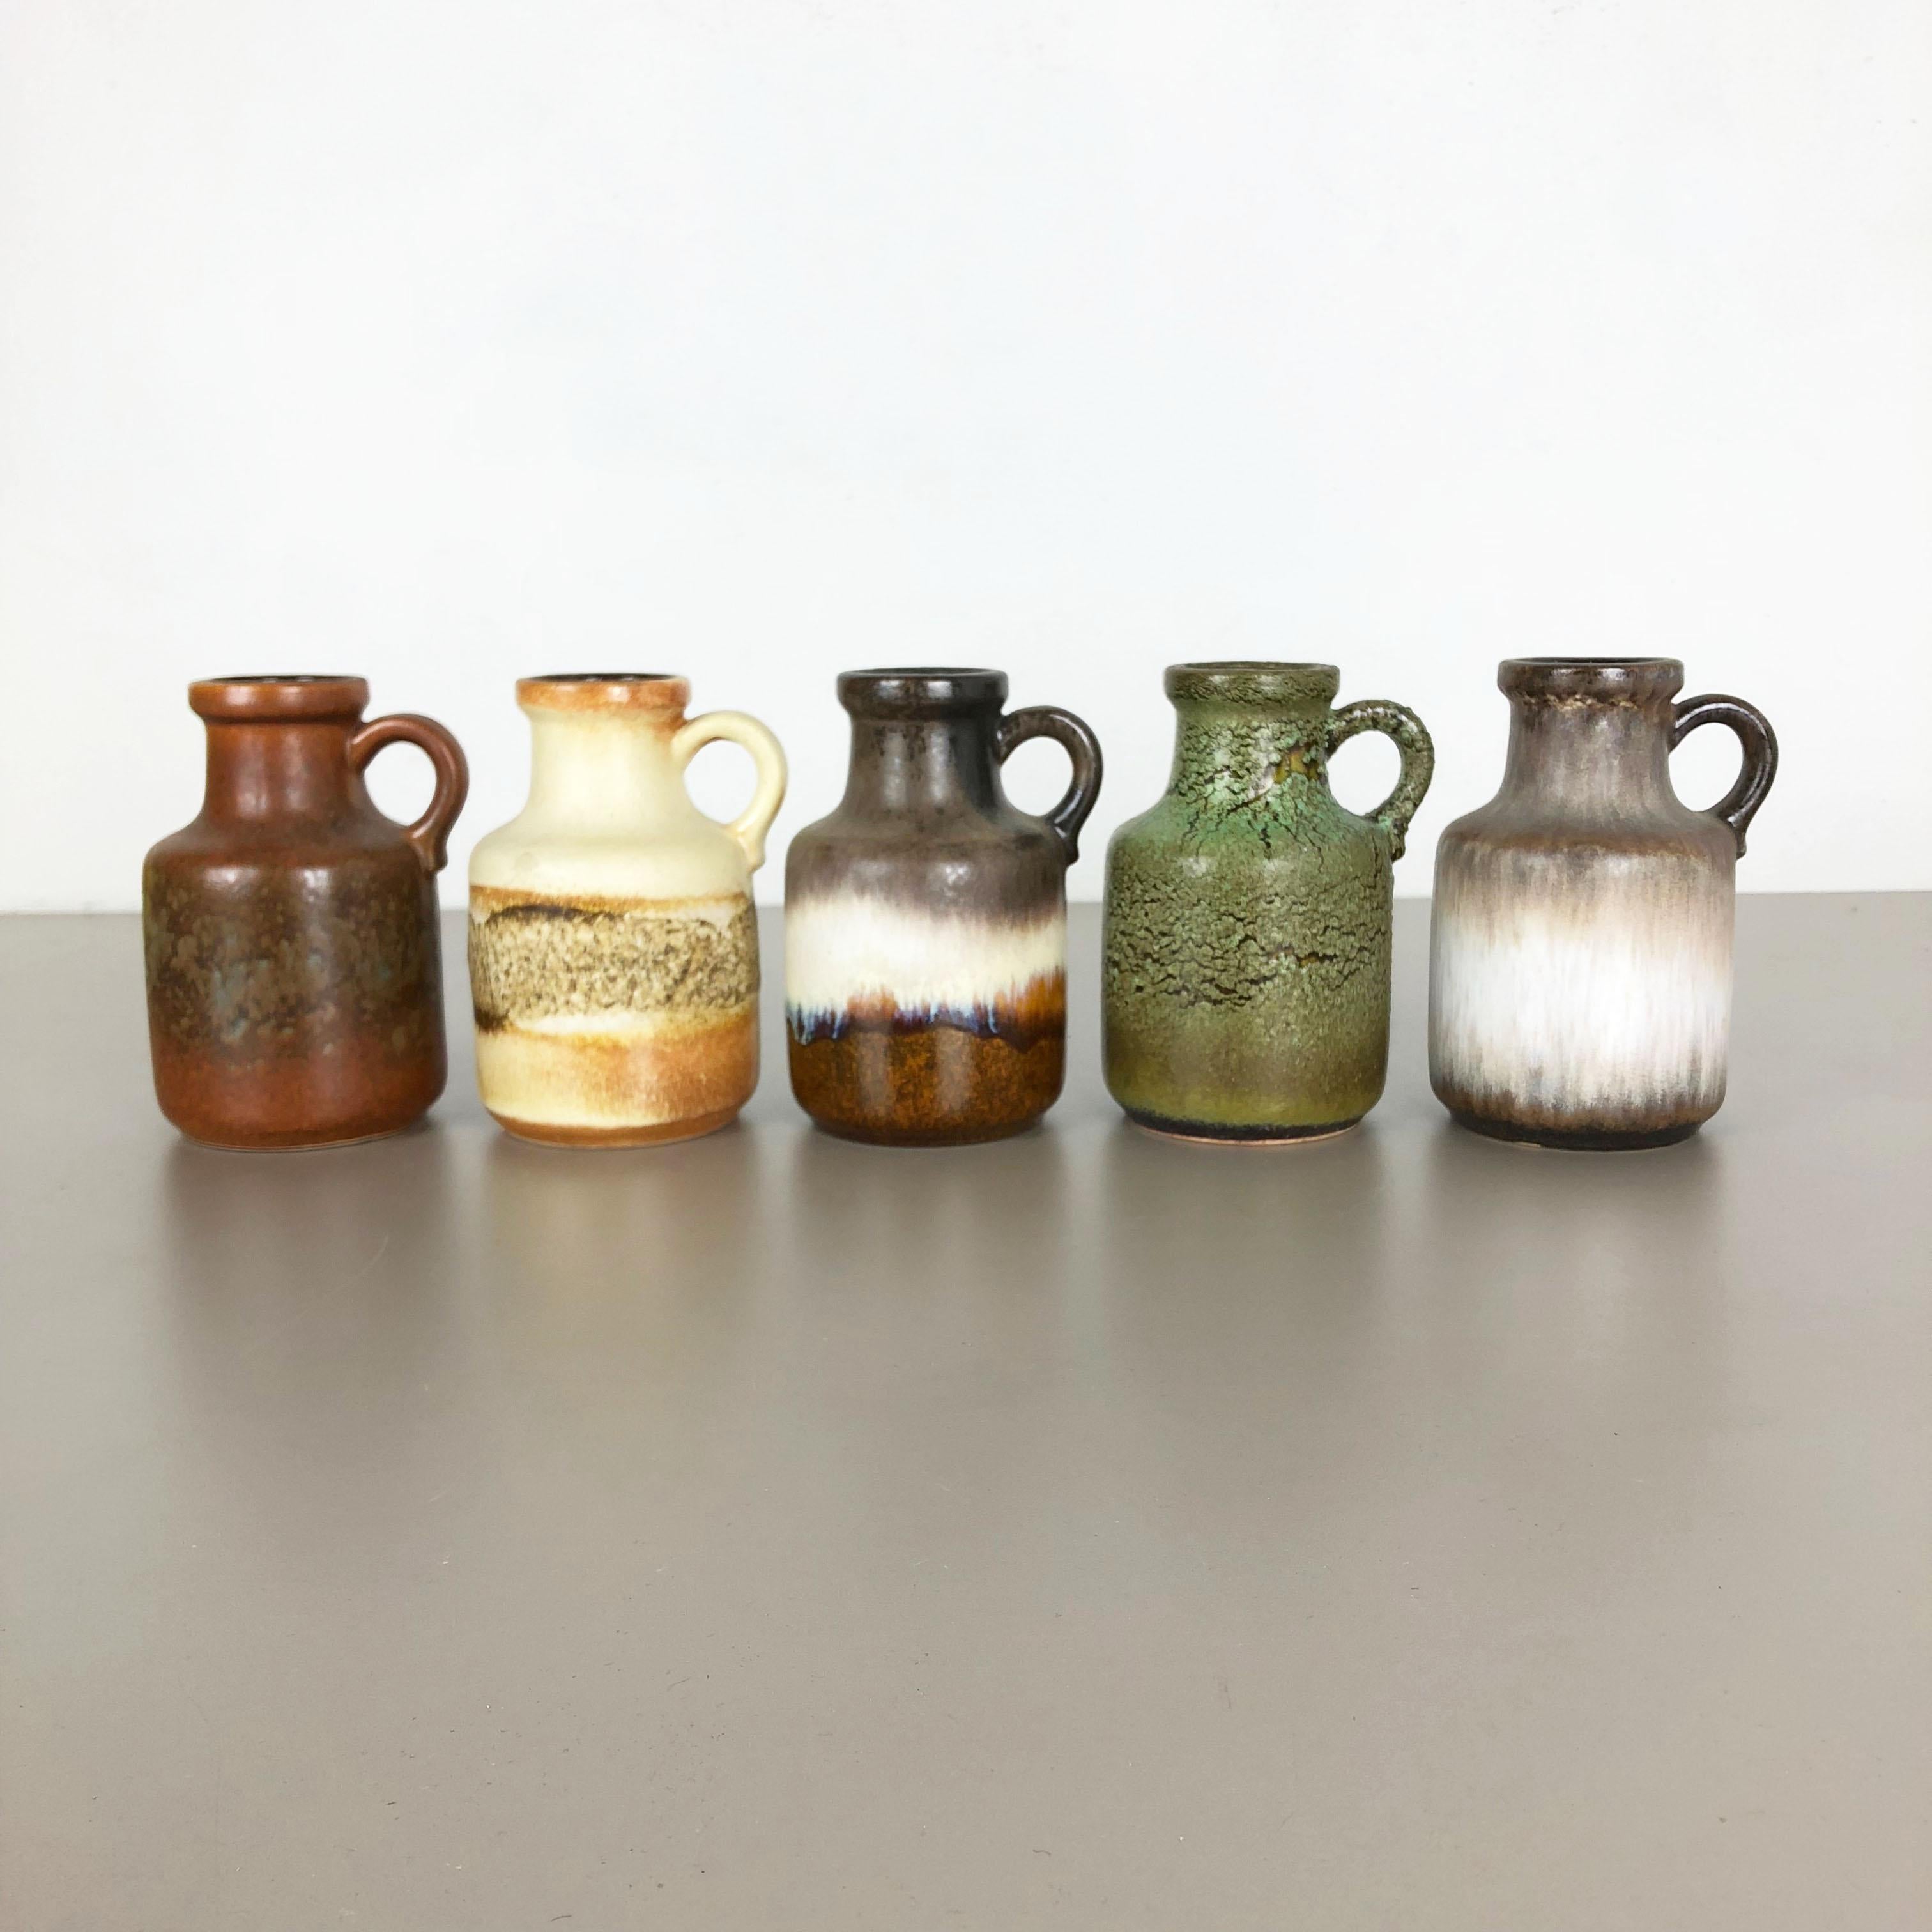 Article:

Set of five fat lava art vases


Model:

414-16

Producer:


Scheurich, Germany


Decade:

1970s

These original vintage vases was produced in the 1970s in Germany. It is made of ceramic pottery in fat lava optic. Super rare in this